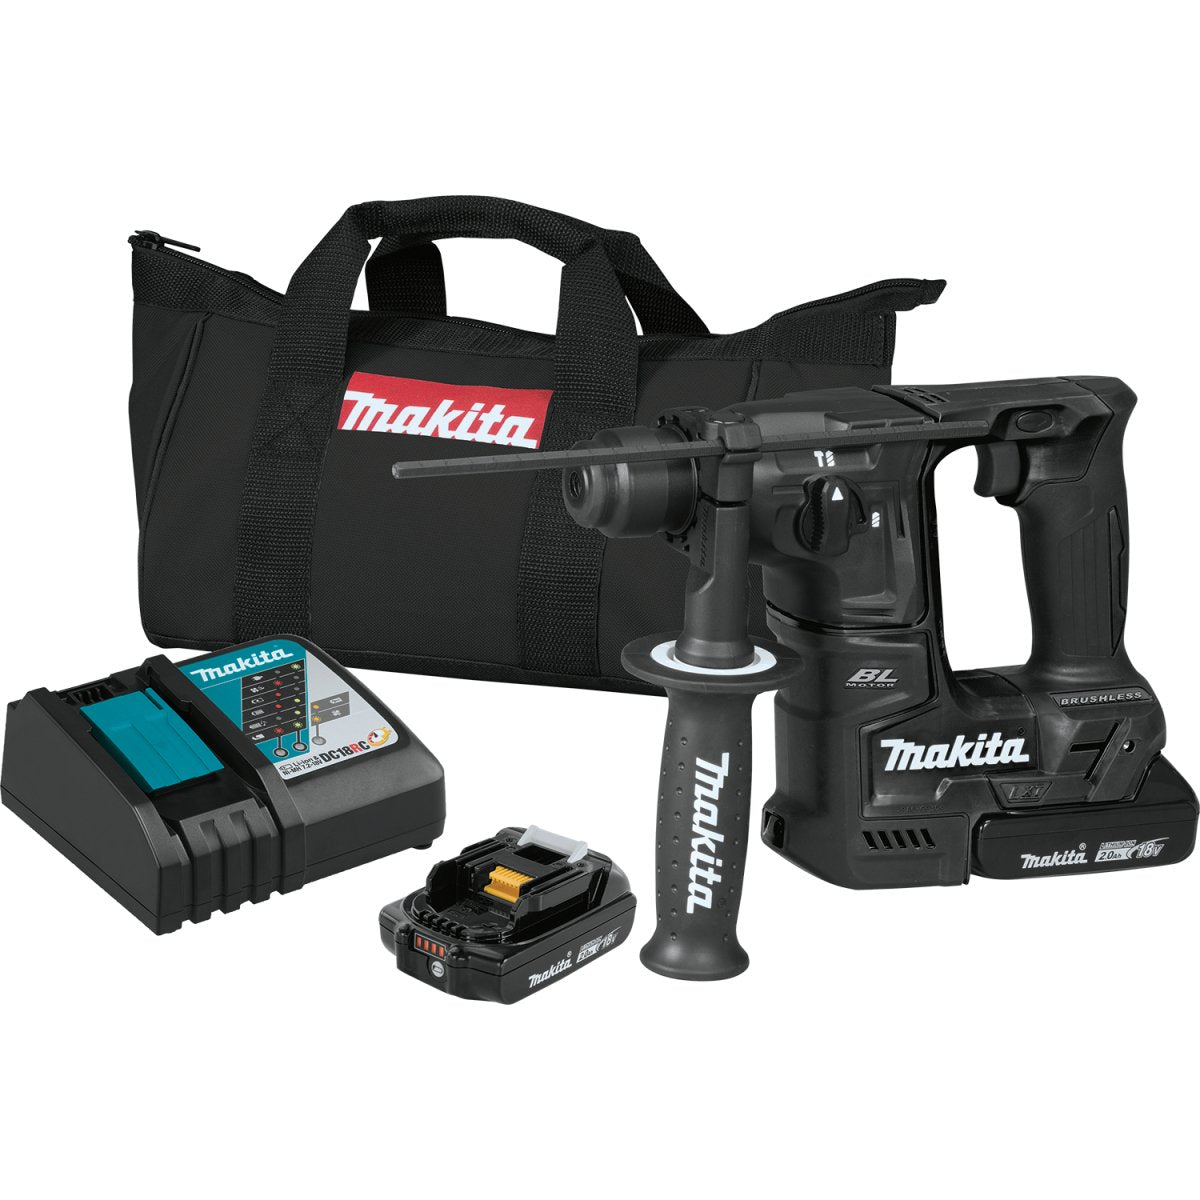 16" Rotary Hammer, Accepts SDS-PLUS Bits - Diamond Tool Store